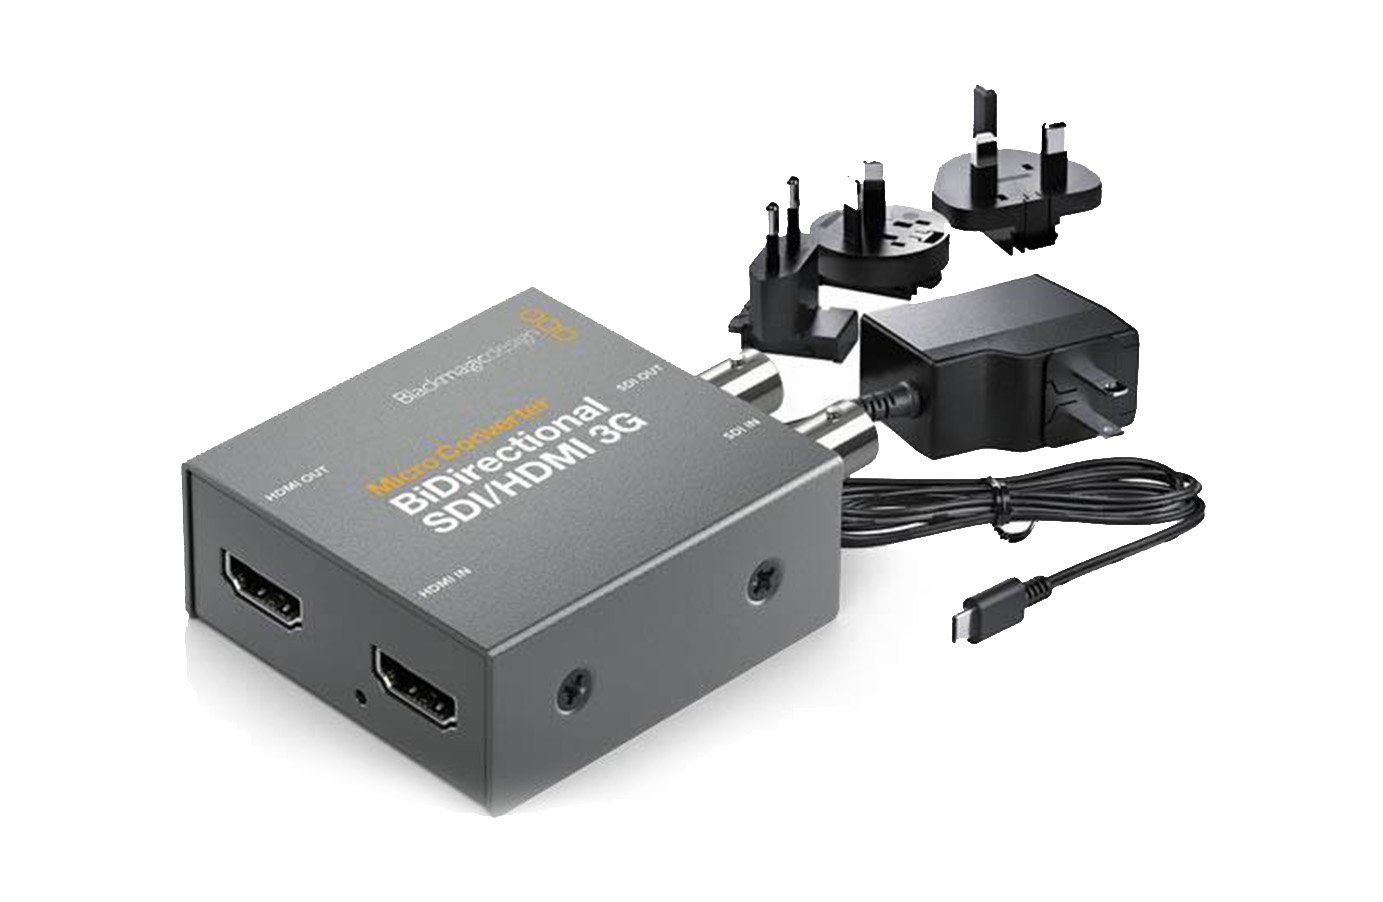 Blackmagic Design Micro Converter BiDirectional SDI/HDMI 3G Hire - £10/Day  or £30/Week — New Day Pictures - 50% Discount on first video equipment hire